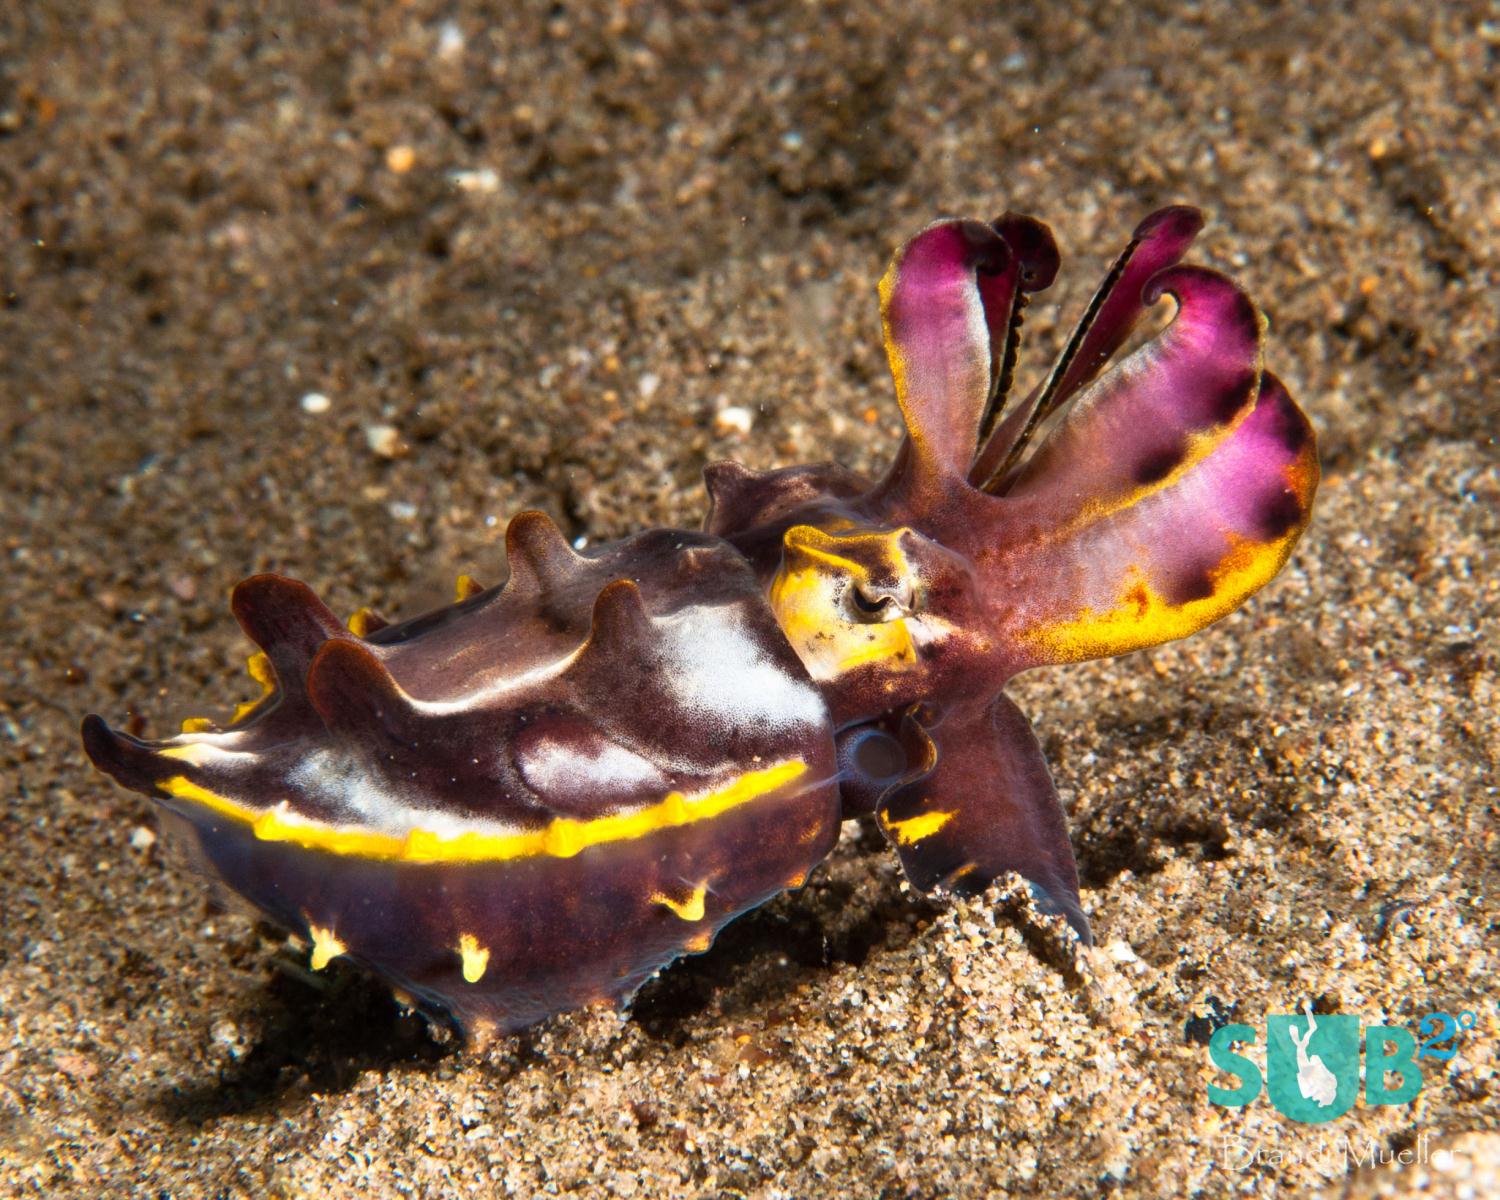 A muck diving favorite, this brightly colored cuttlefish was seen in the Philippines.